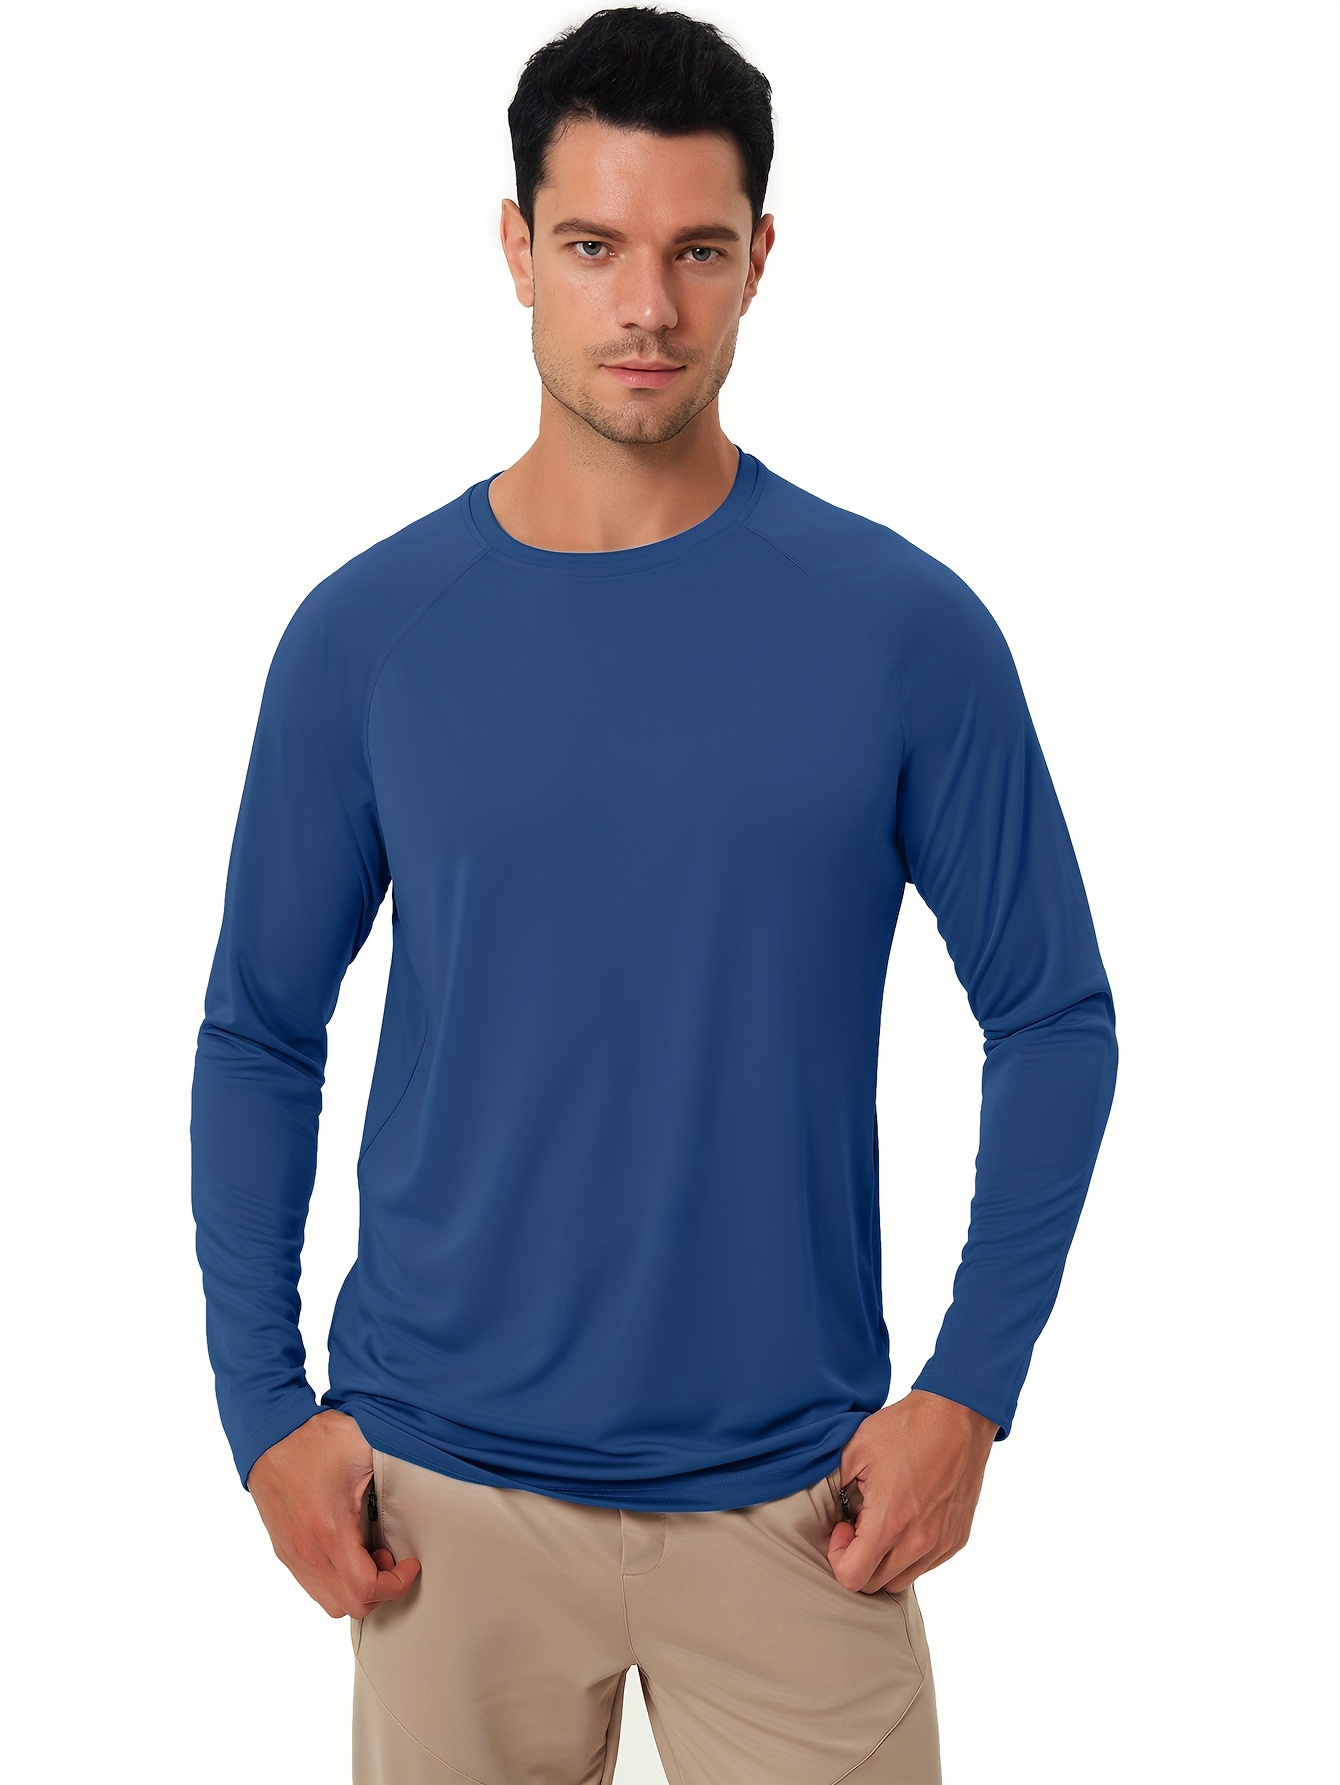 Men's Long Sleeve Shirt UPF 50 Quick Dry for Outdoor Sports, Bright Blue / L